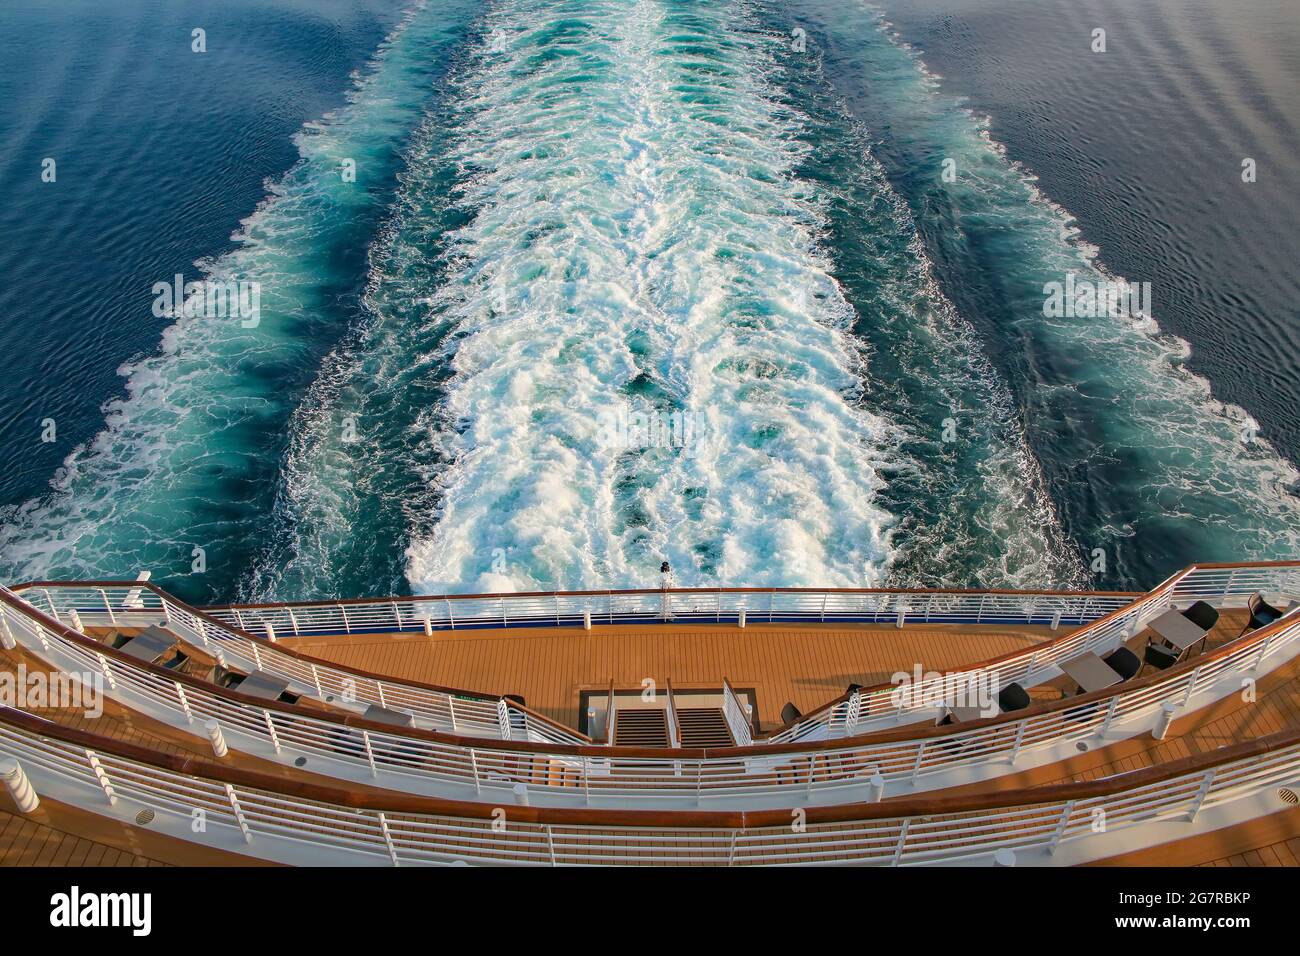 Looking down at the aft or back decks of a cruise ship and the wake or waves in the sea as it sails across the ocean. Open decks with tables & chairs Stock Photo